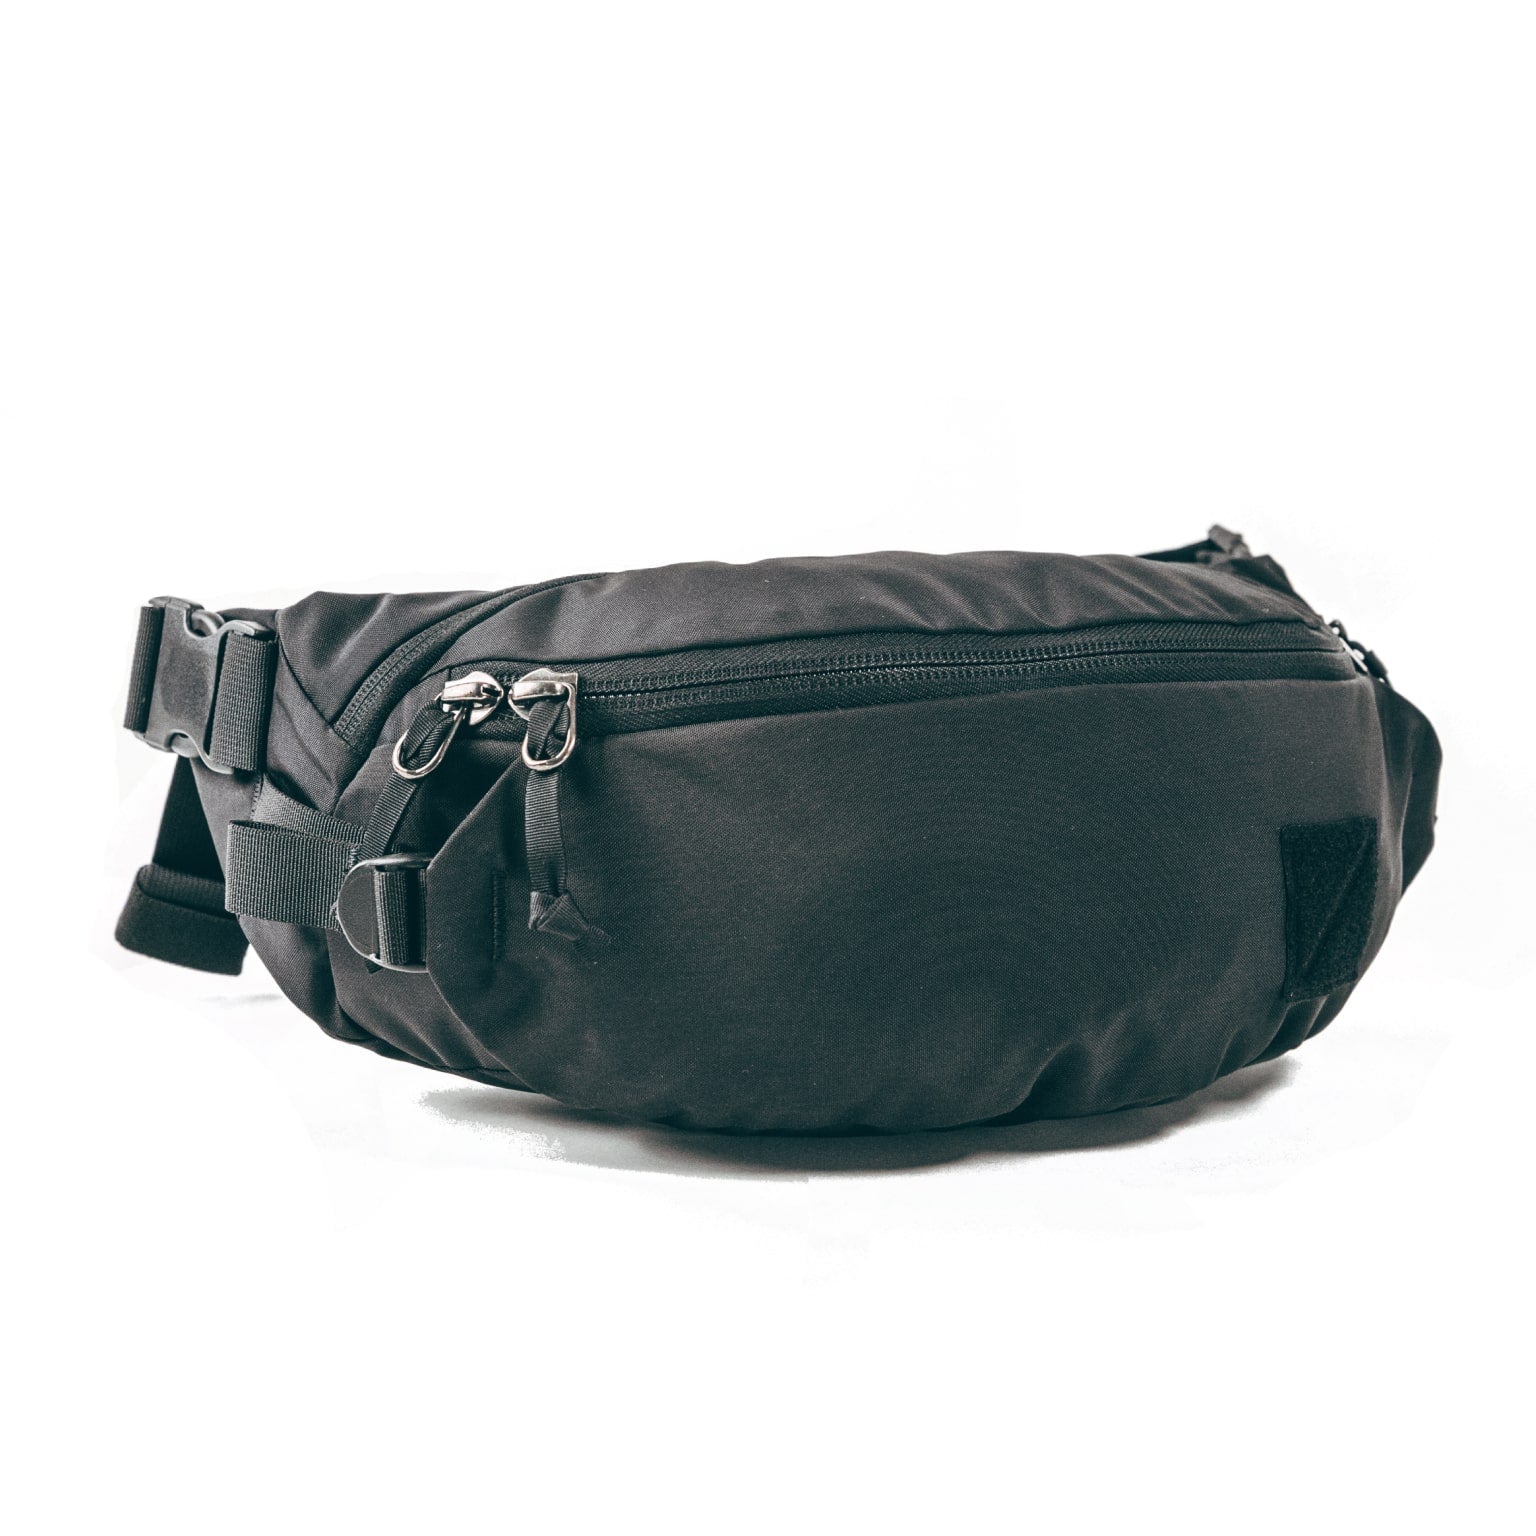 Customer Review of Fanny Pack 